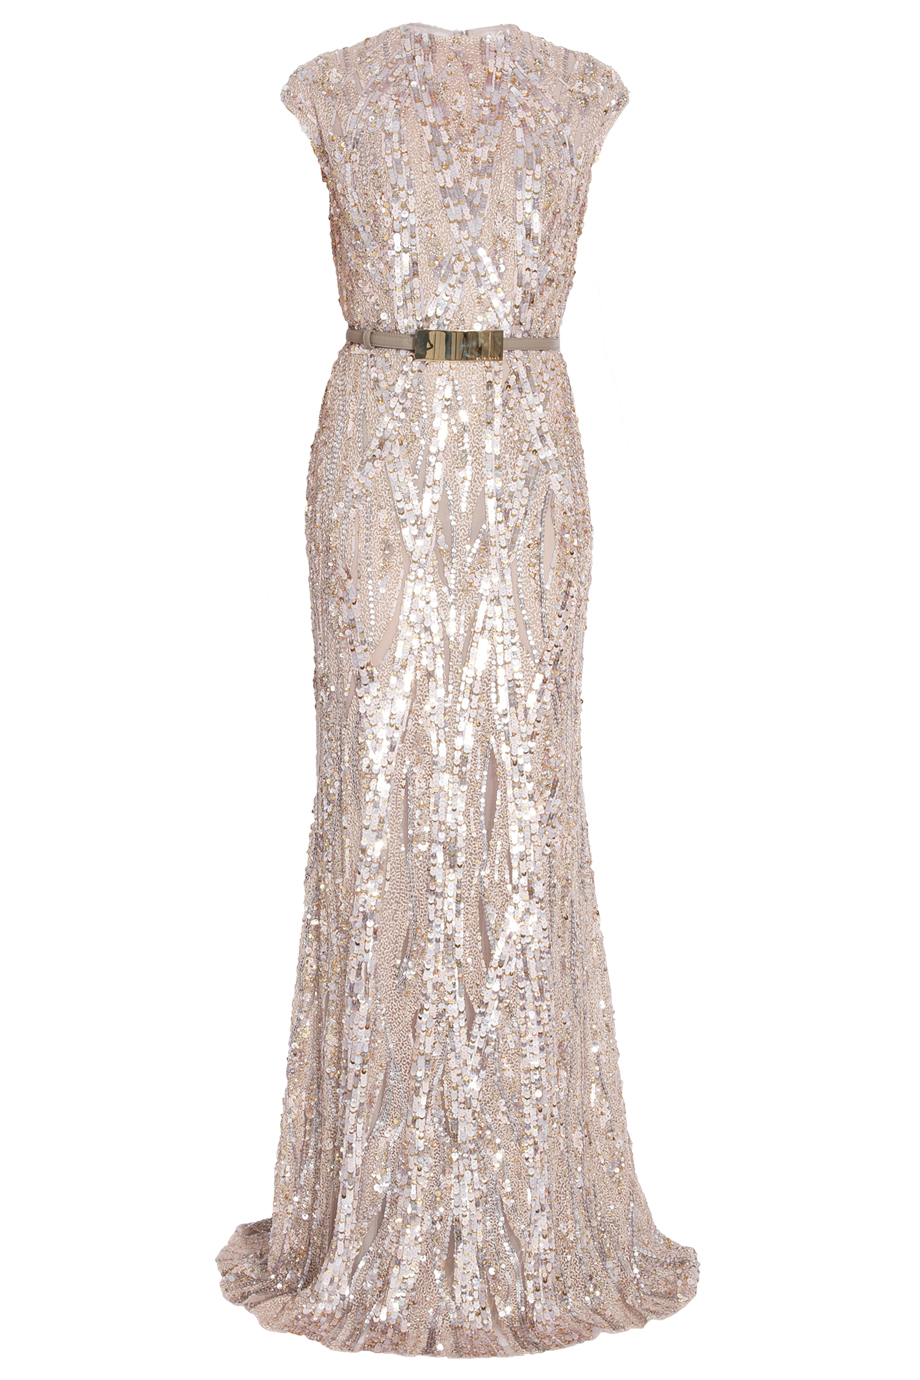 Lyst - Elie Saab Fully Sequin Gown in Pink